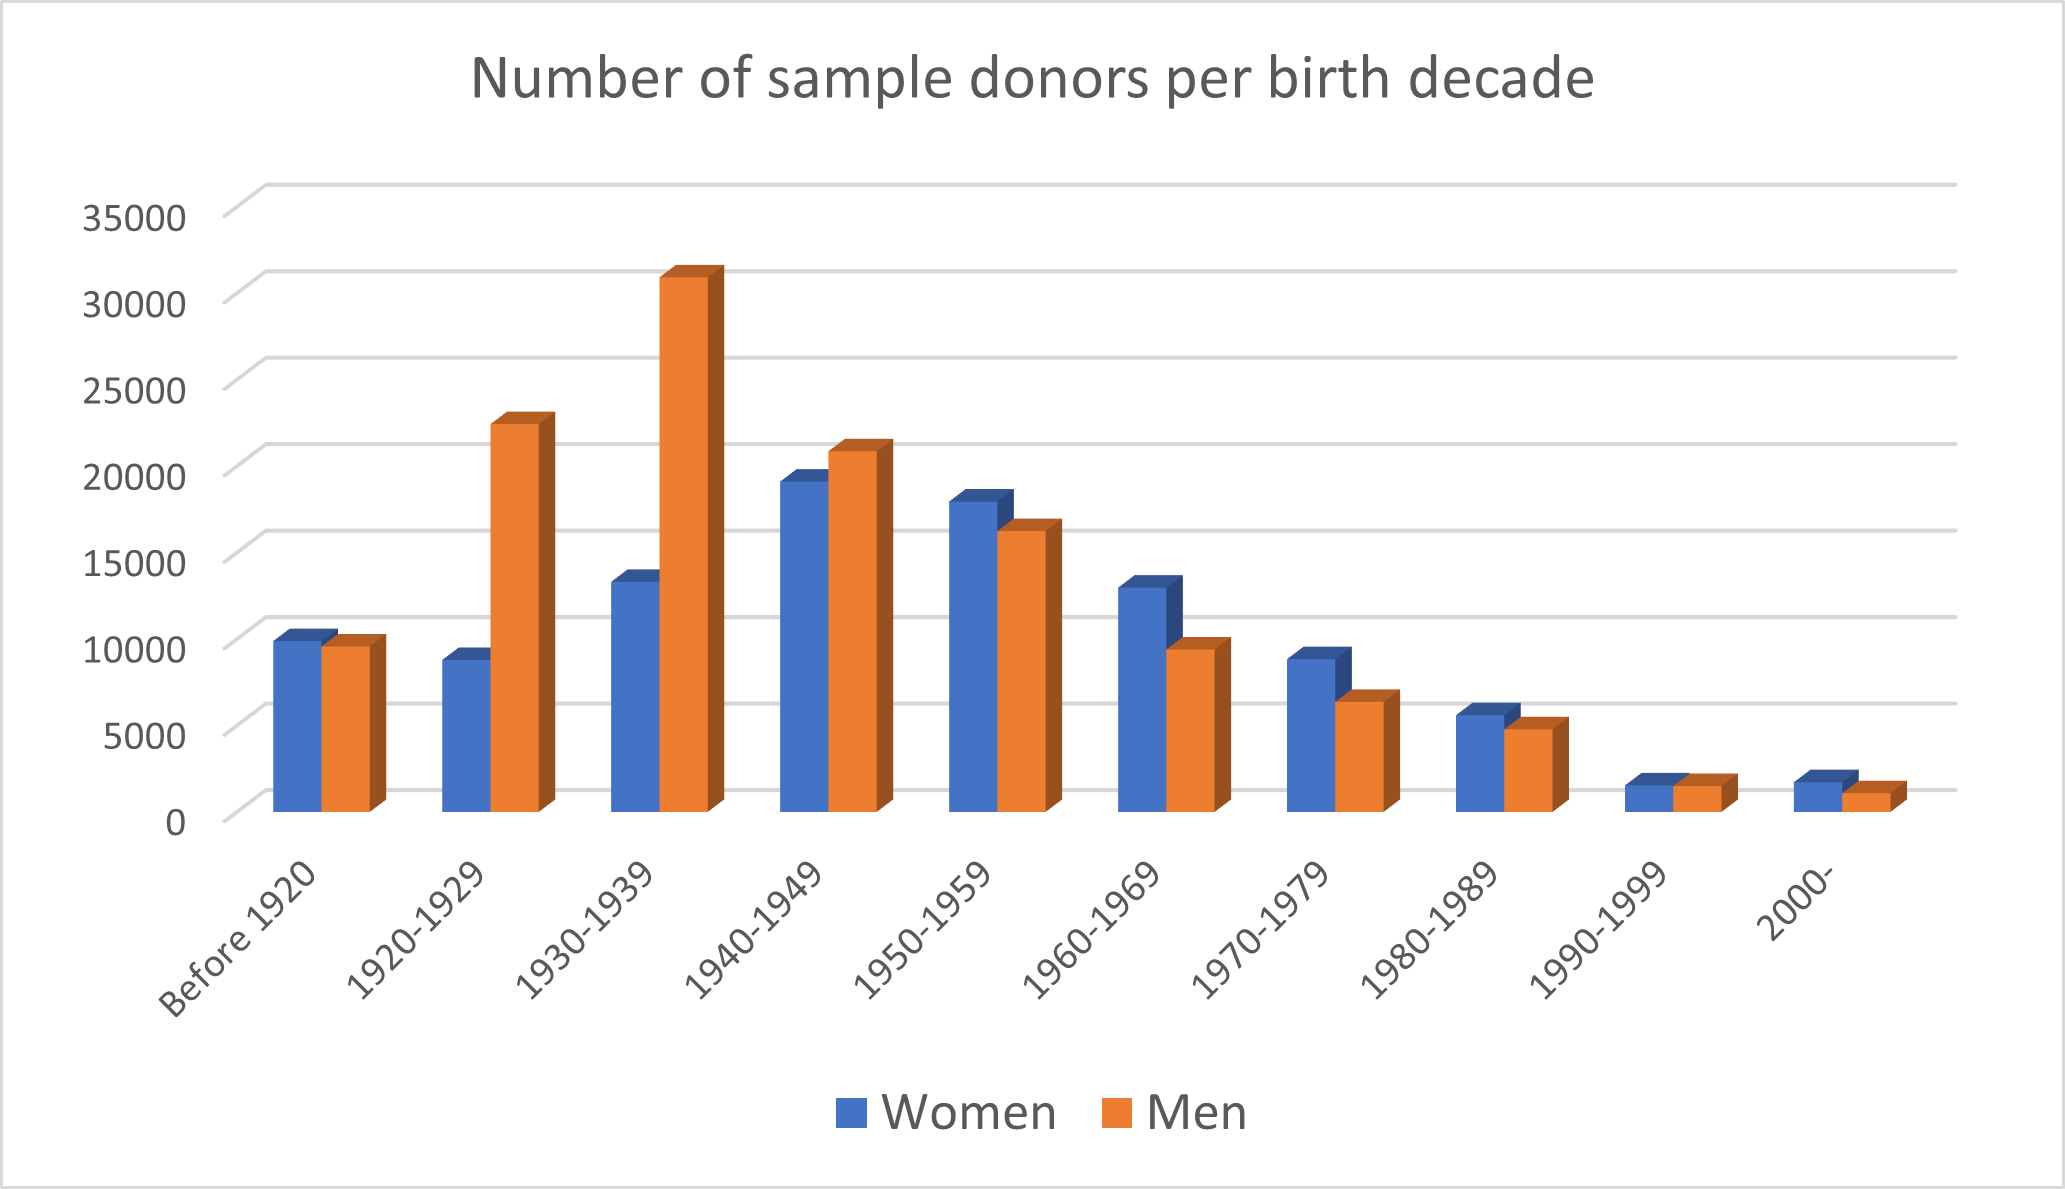 Number of sample donors per birth decade.